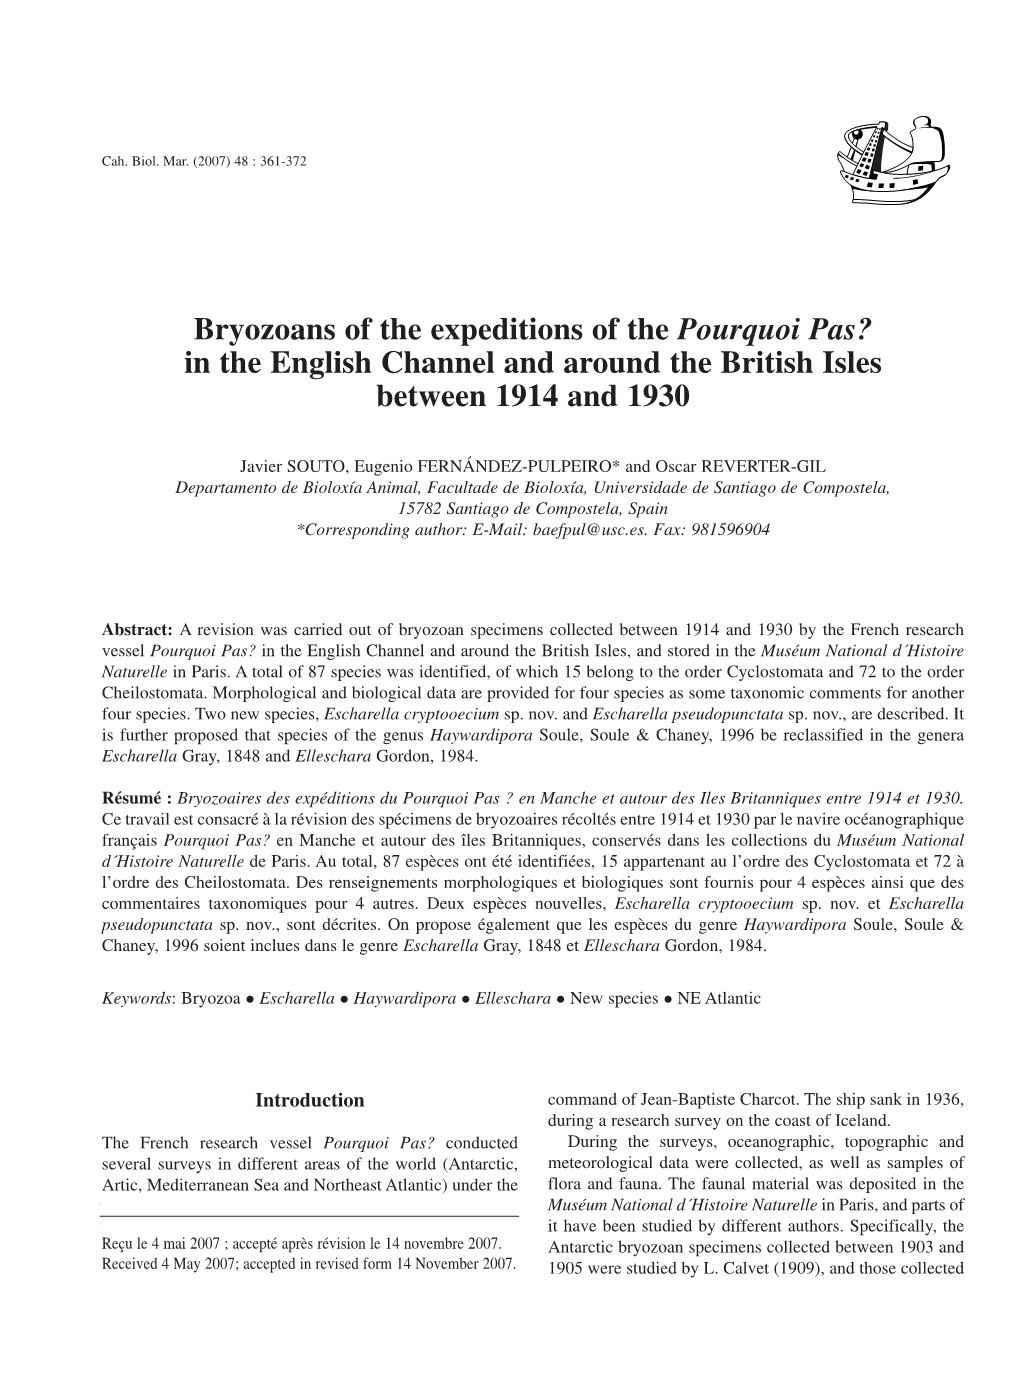 Bryozoans of the Expeditions of the Pourquoi Pas? in the English Channel and Around the British Isles Between 1914 and 1930